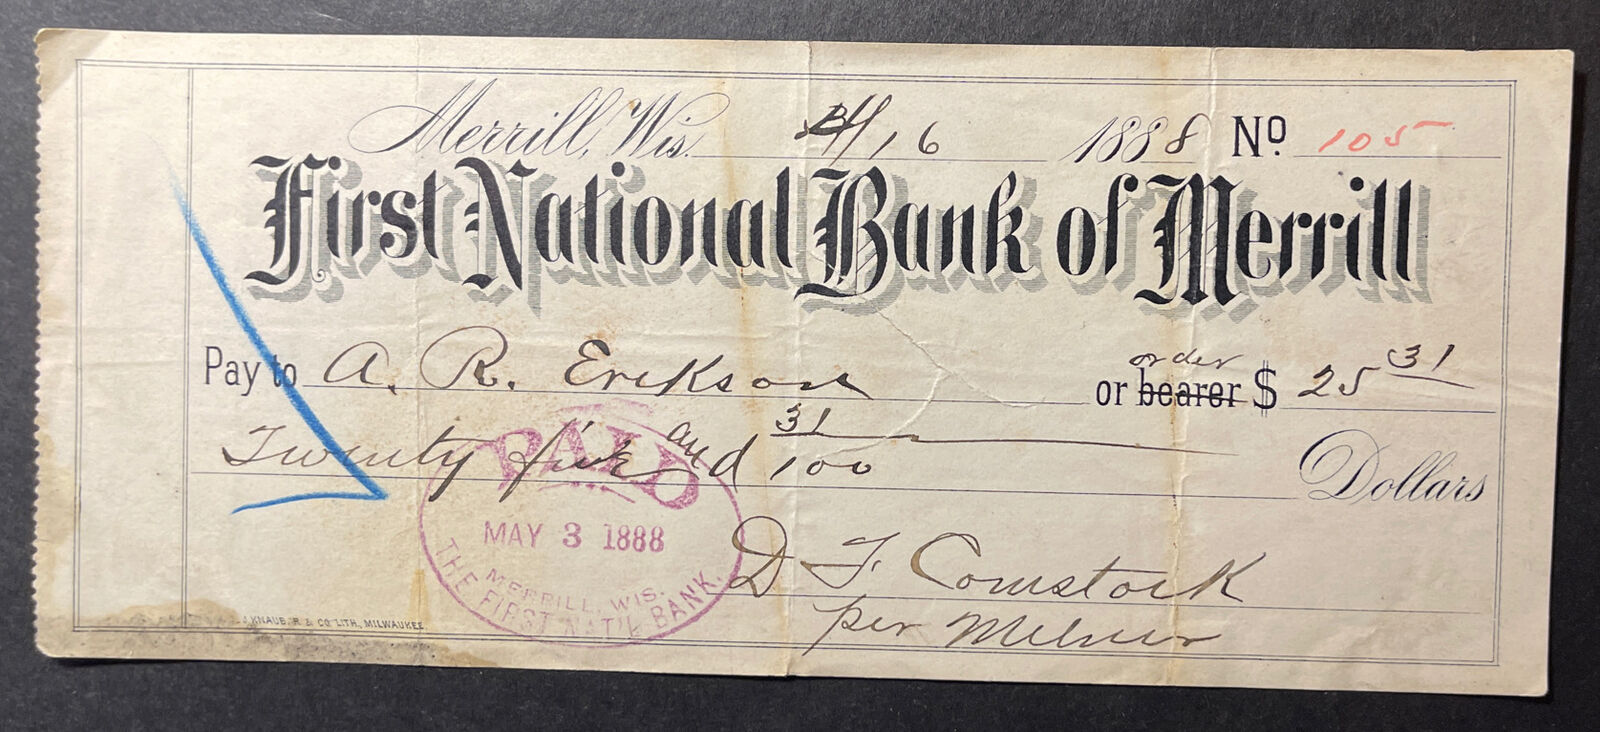 First National Bank of Merrill Wisconsin 1888 bank draft